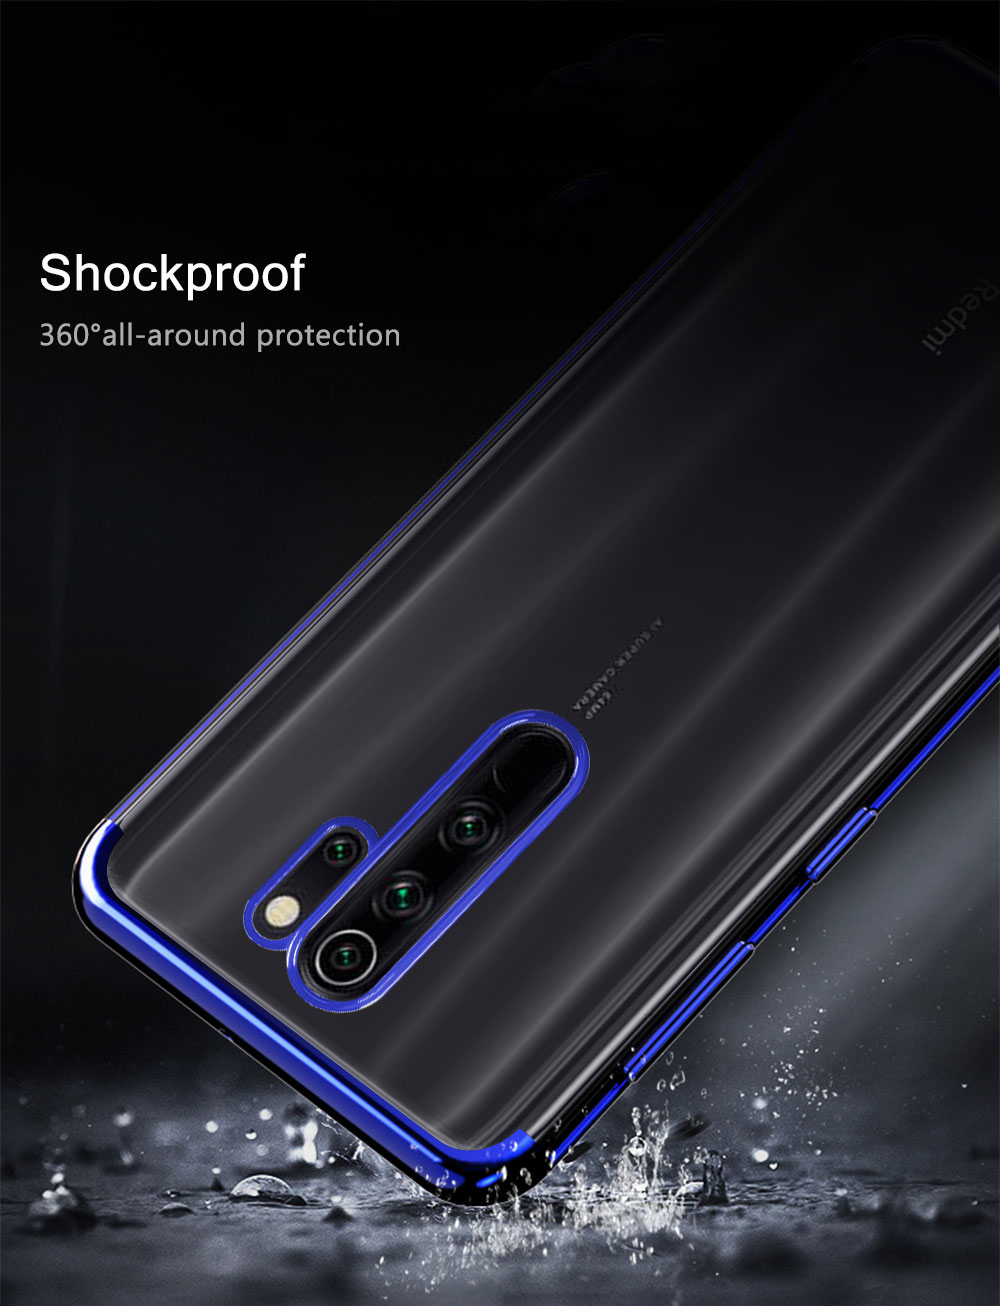 Bakeey-Plating-Shockproof-Transparent-Soft-TPU-Protective-Case-for-Xiaomi-Redmi-Note-8-pro-1575450-2